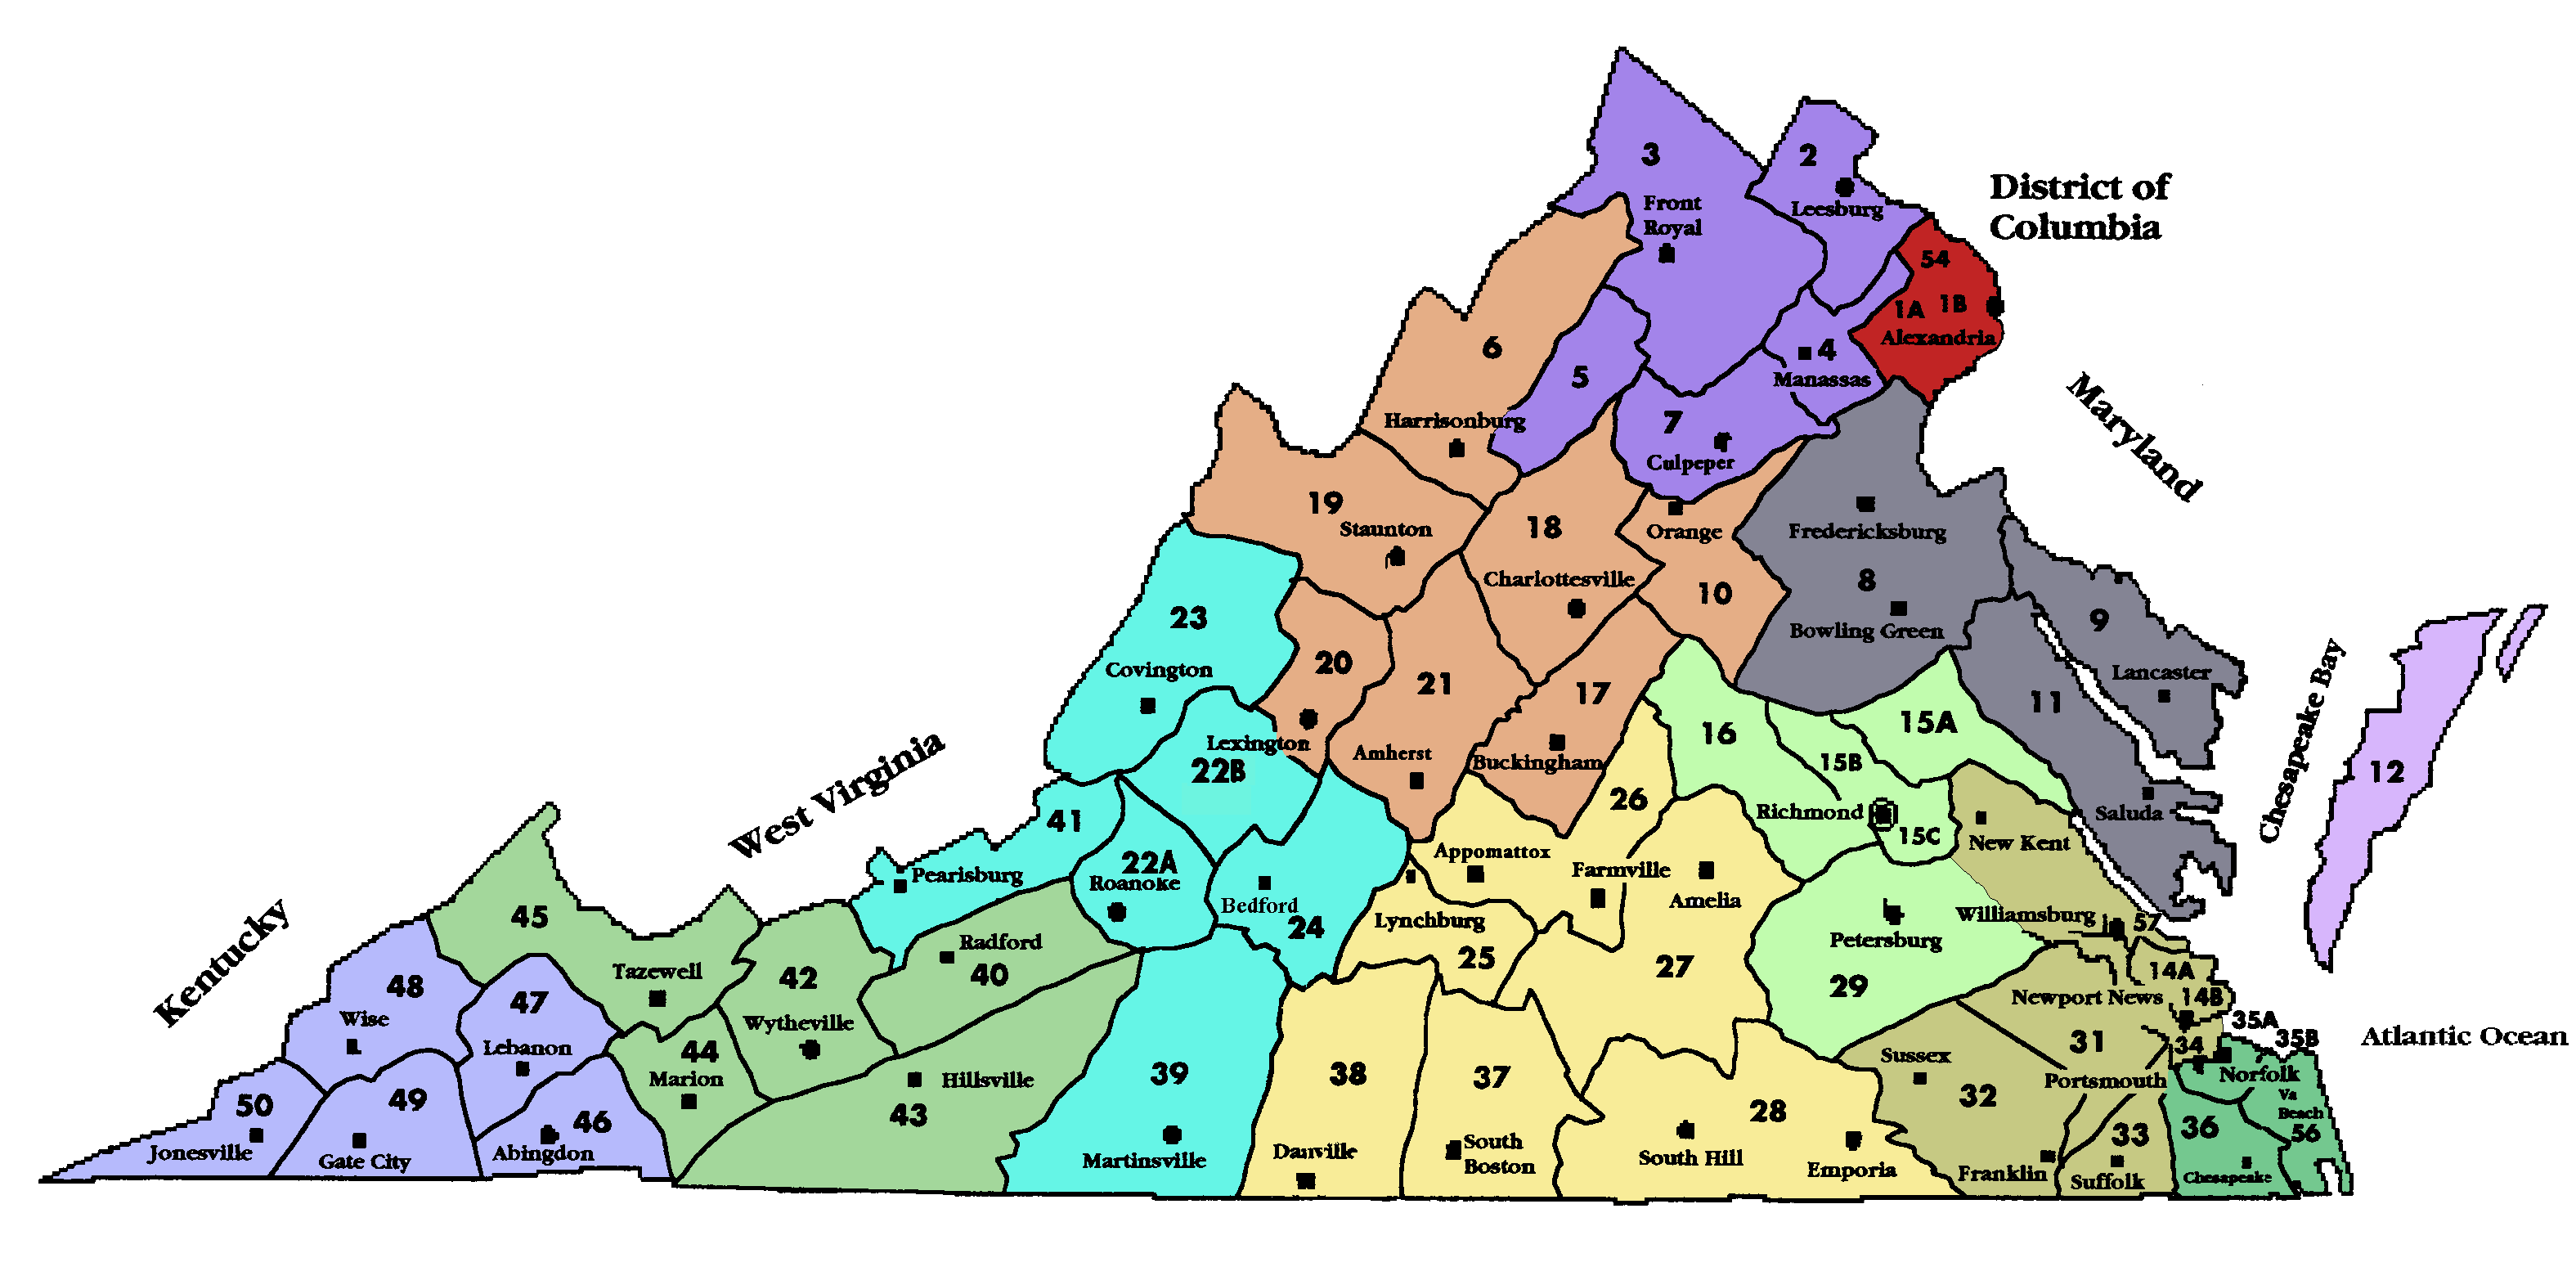 this-is-an-image-of-virginia-and-all-of-the-districts